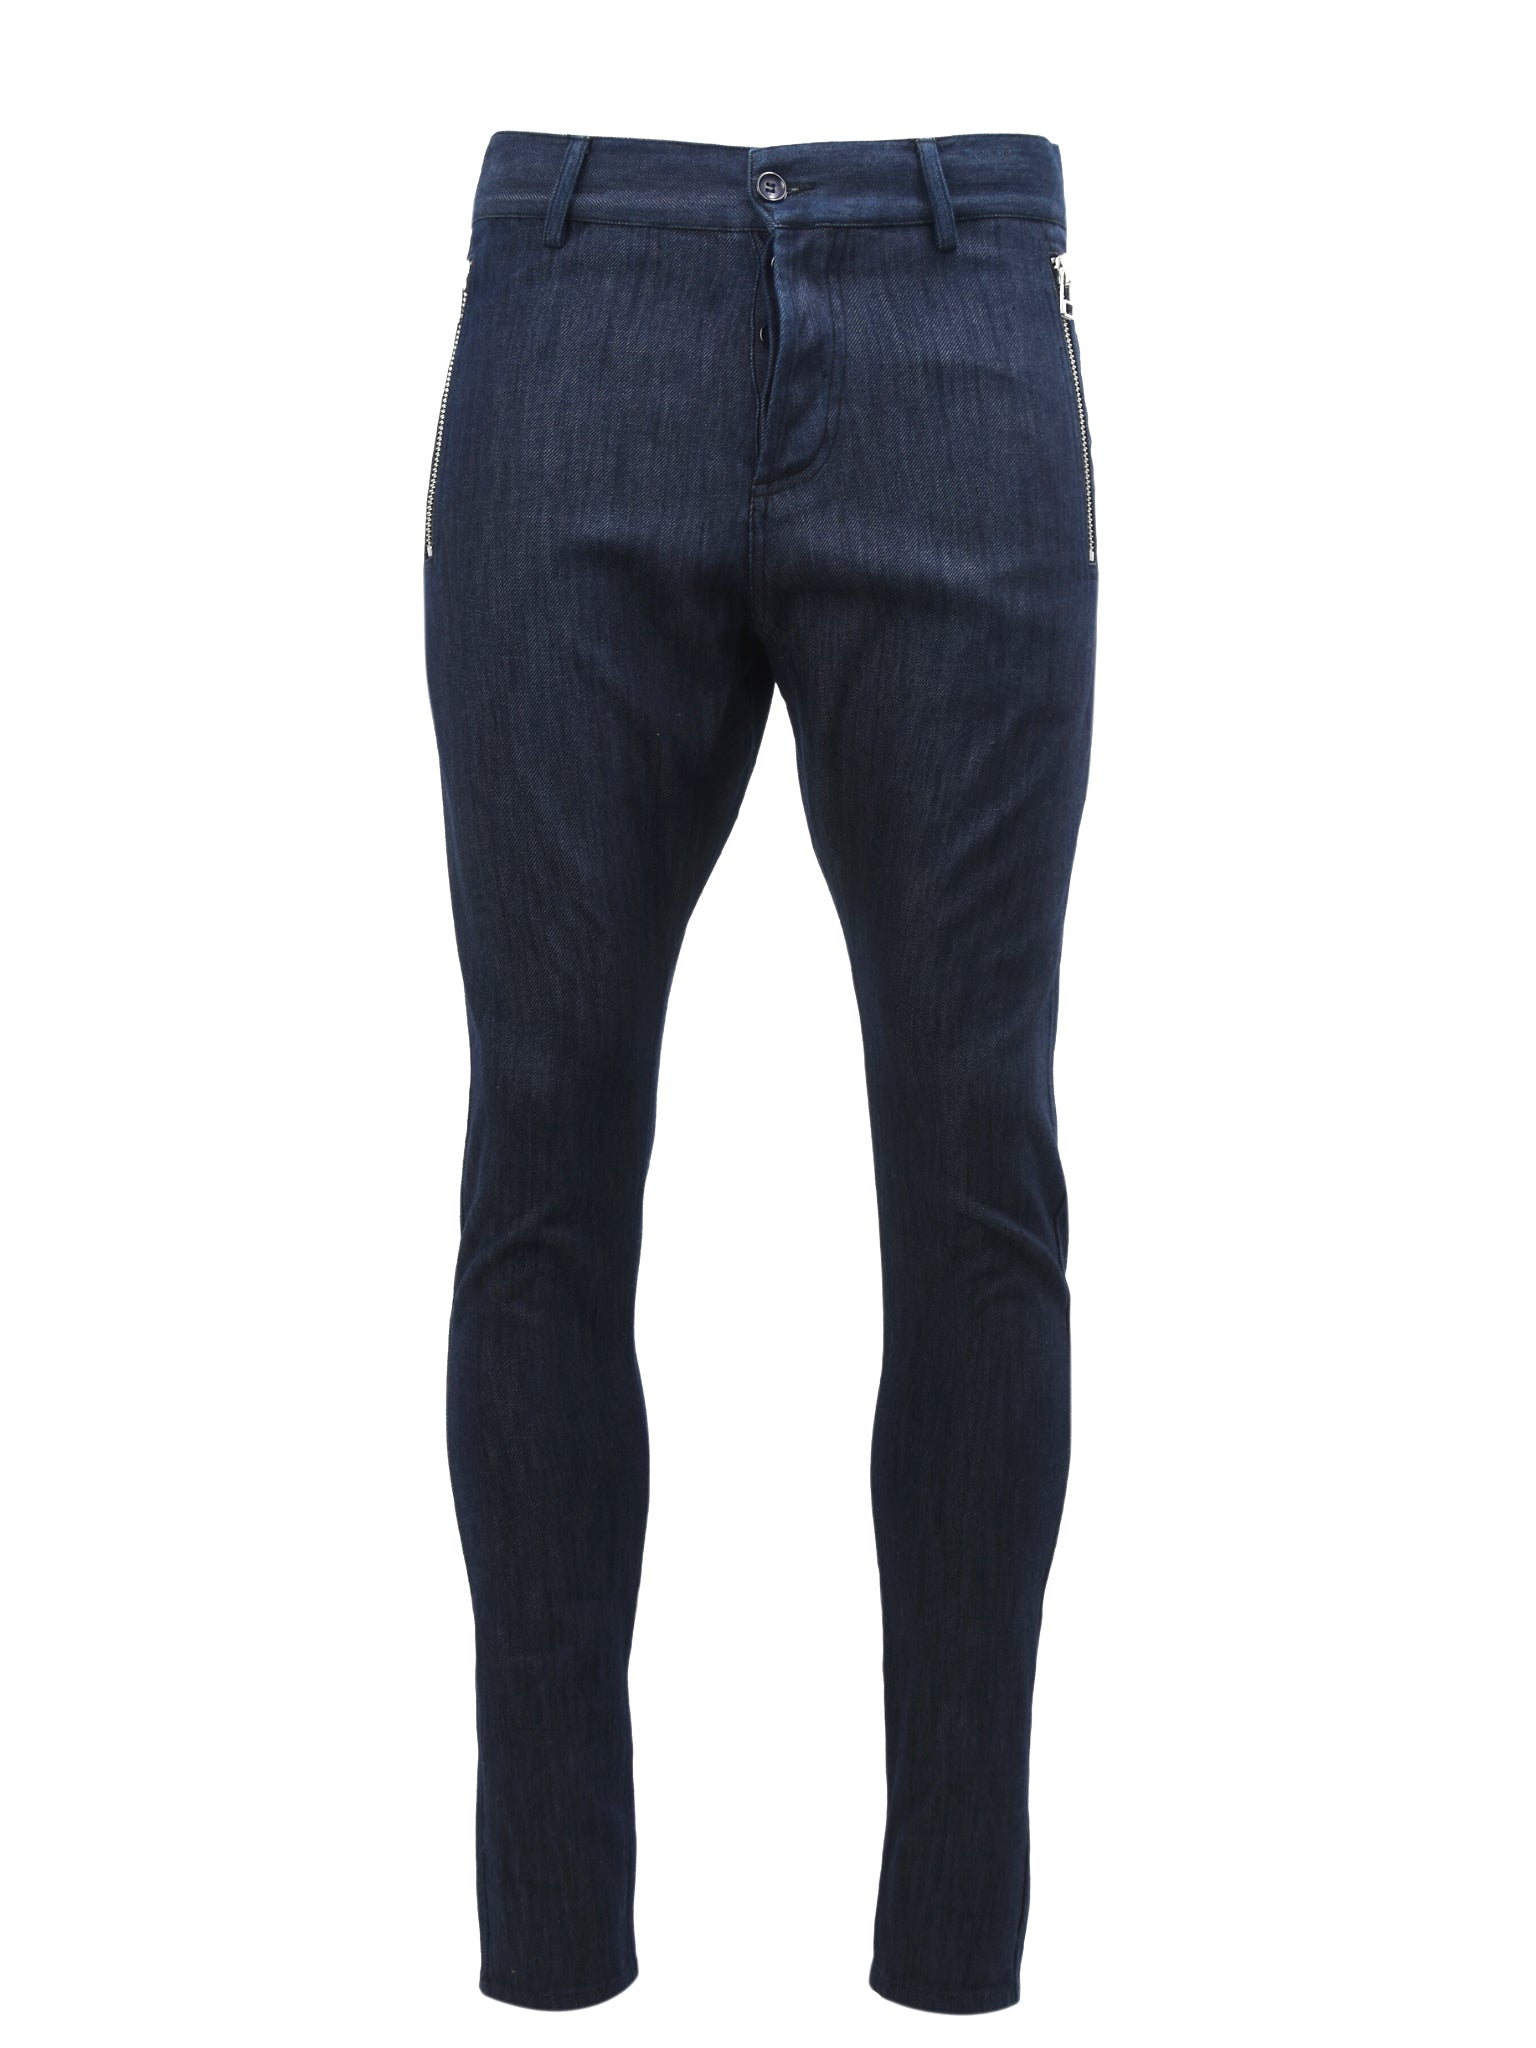 DARK BLUE STRAIGHT LEG JEANS WITH CHUNKY SILVER ZIPS